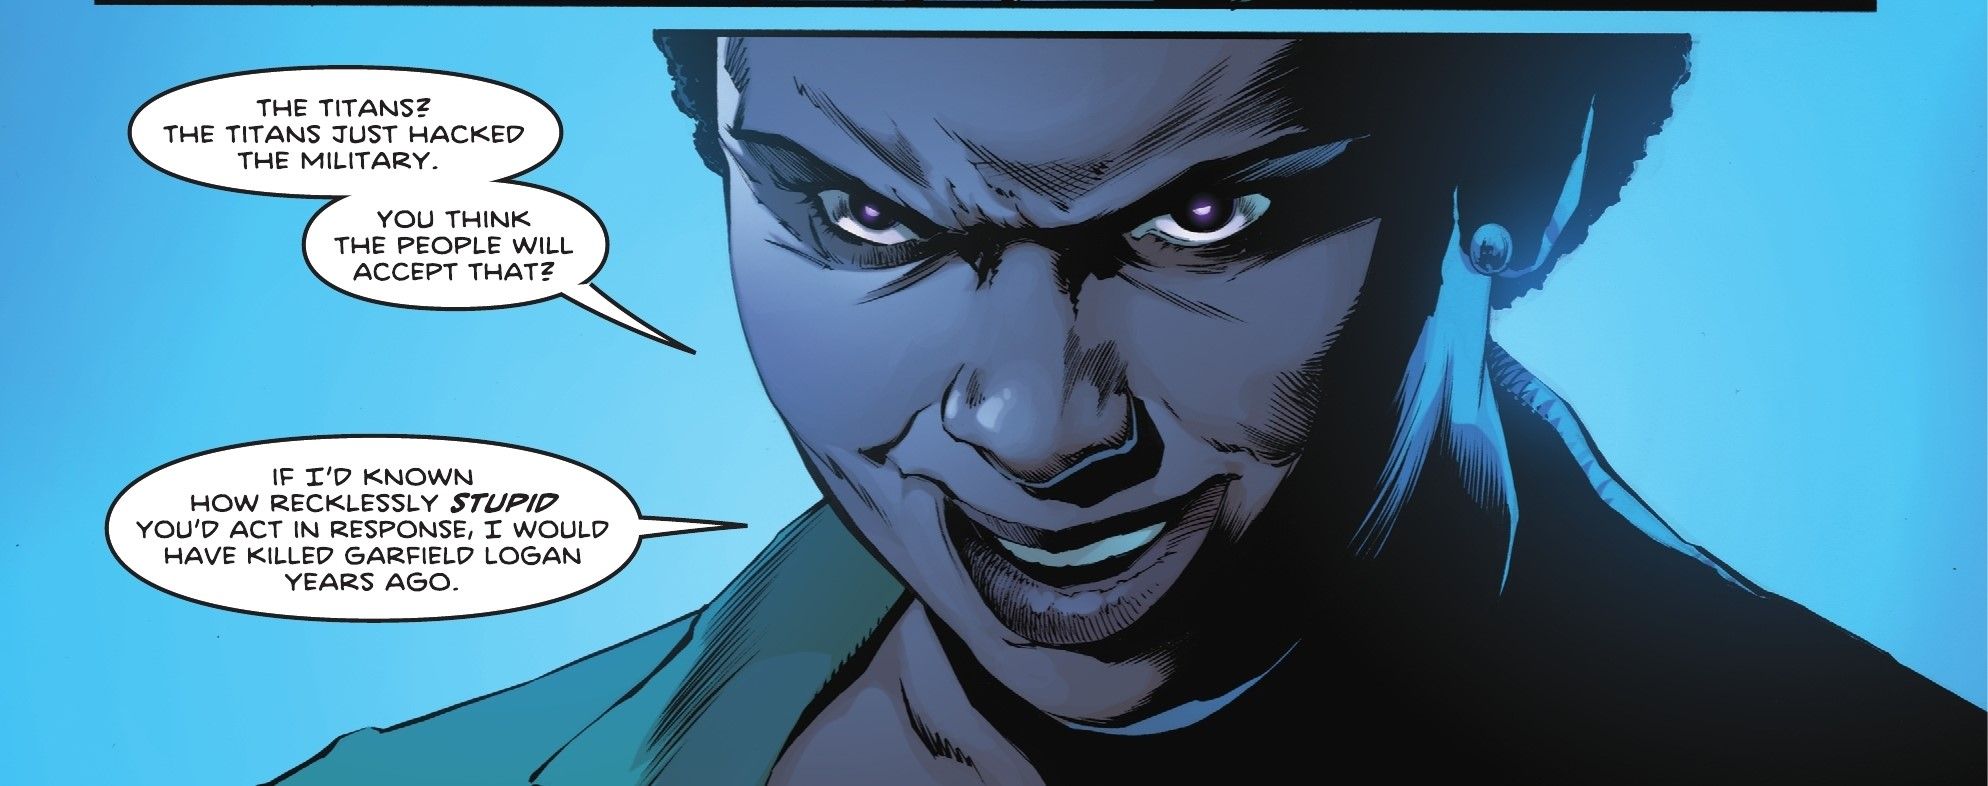 Titans Beast World #5 Amanda Waller warning Nightwing that the word is going to turn on the Titans